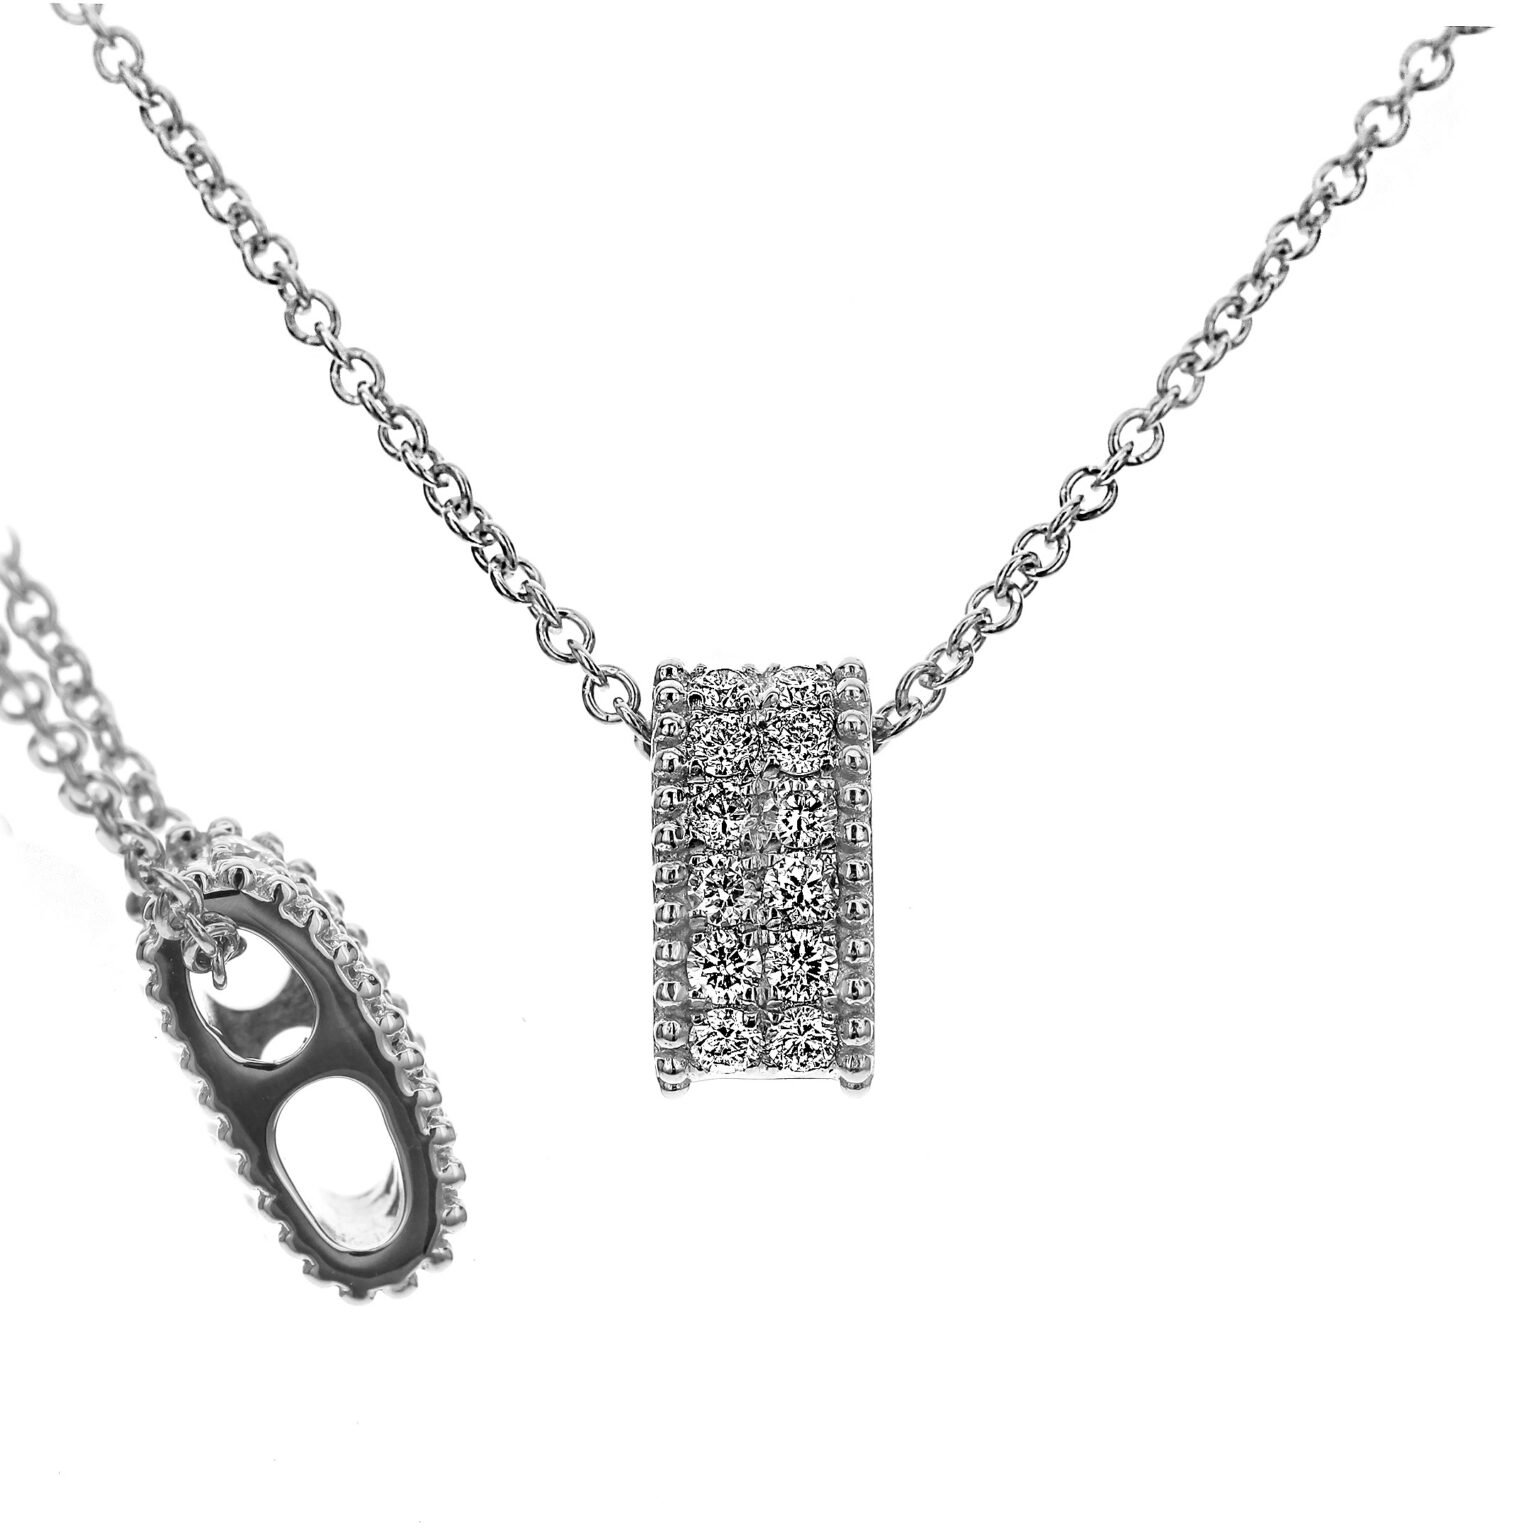 White Gold and Diamond Slide Necklace